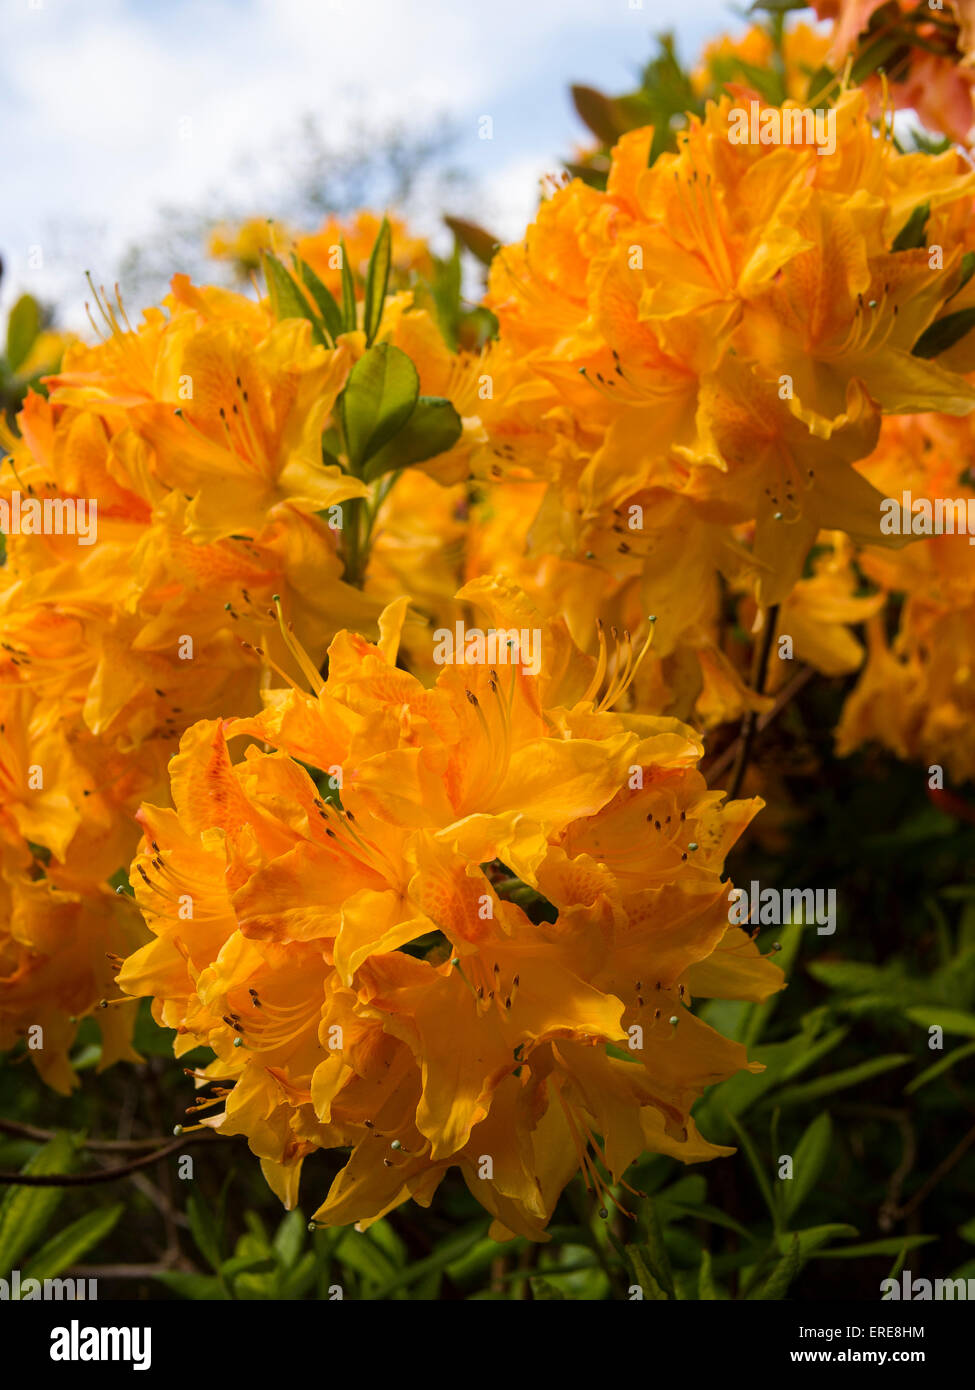 Colourful Rhododendron flowers at Lea Gardens, Lea,Derbyshire,UK. Stock Photo